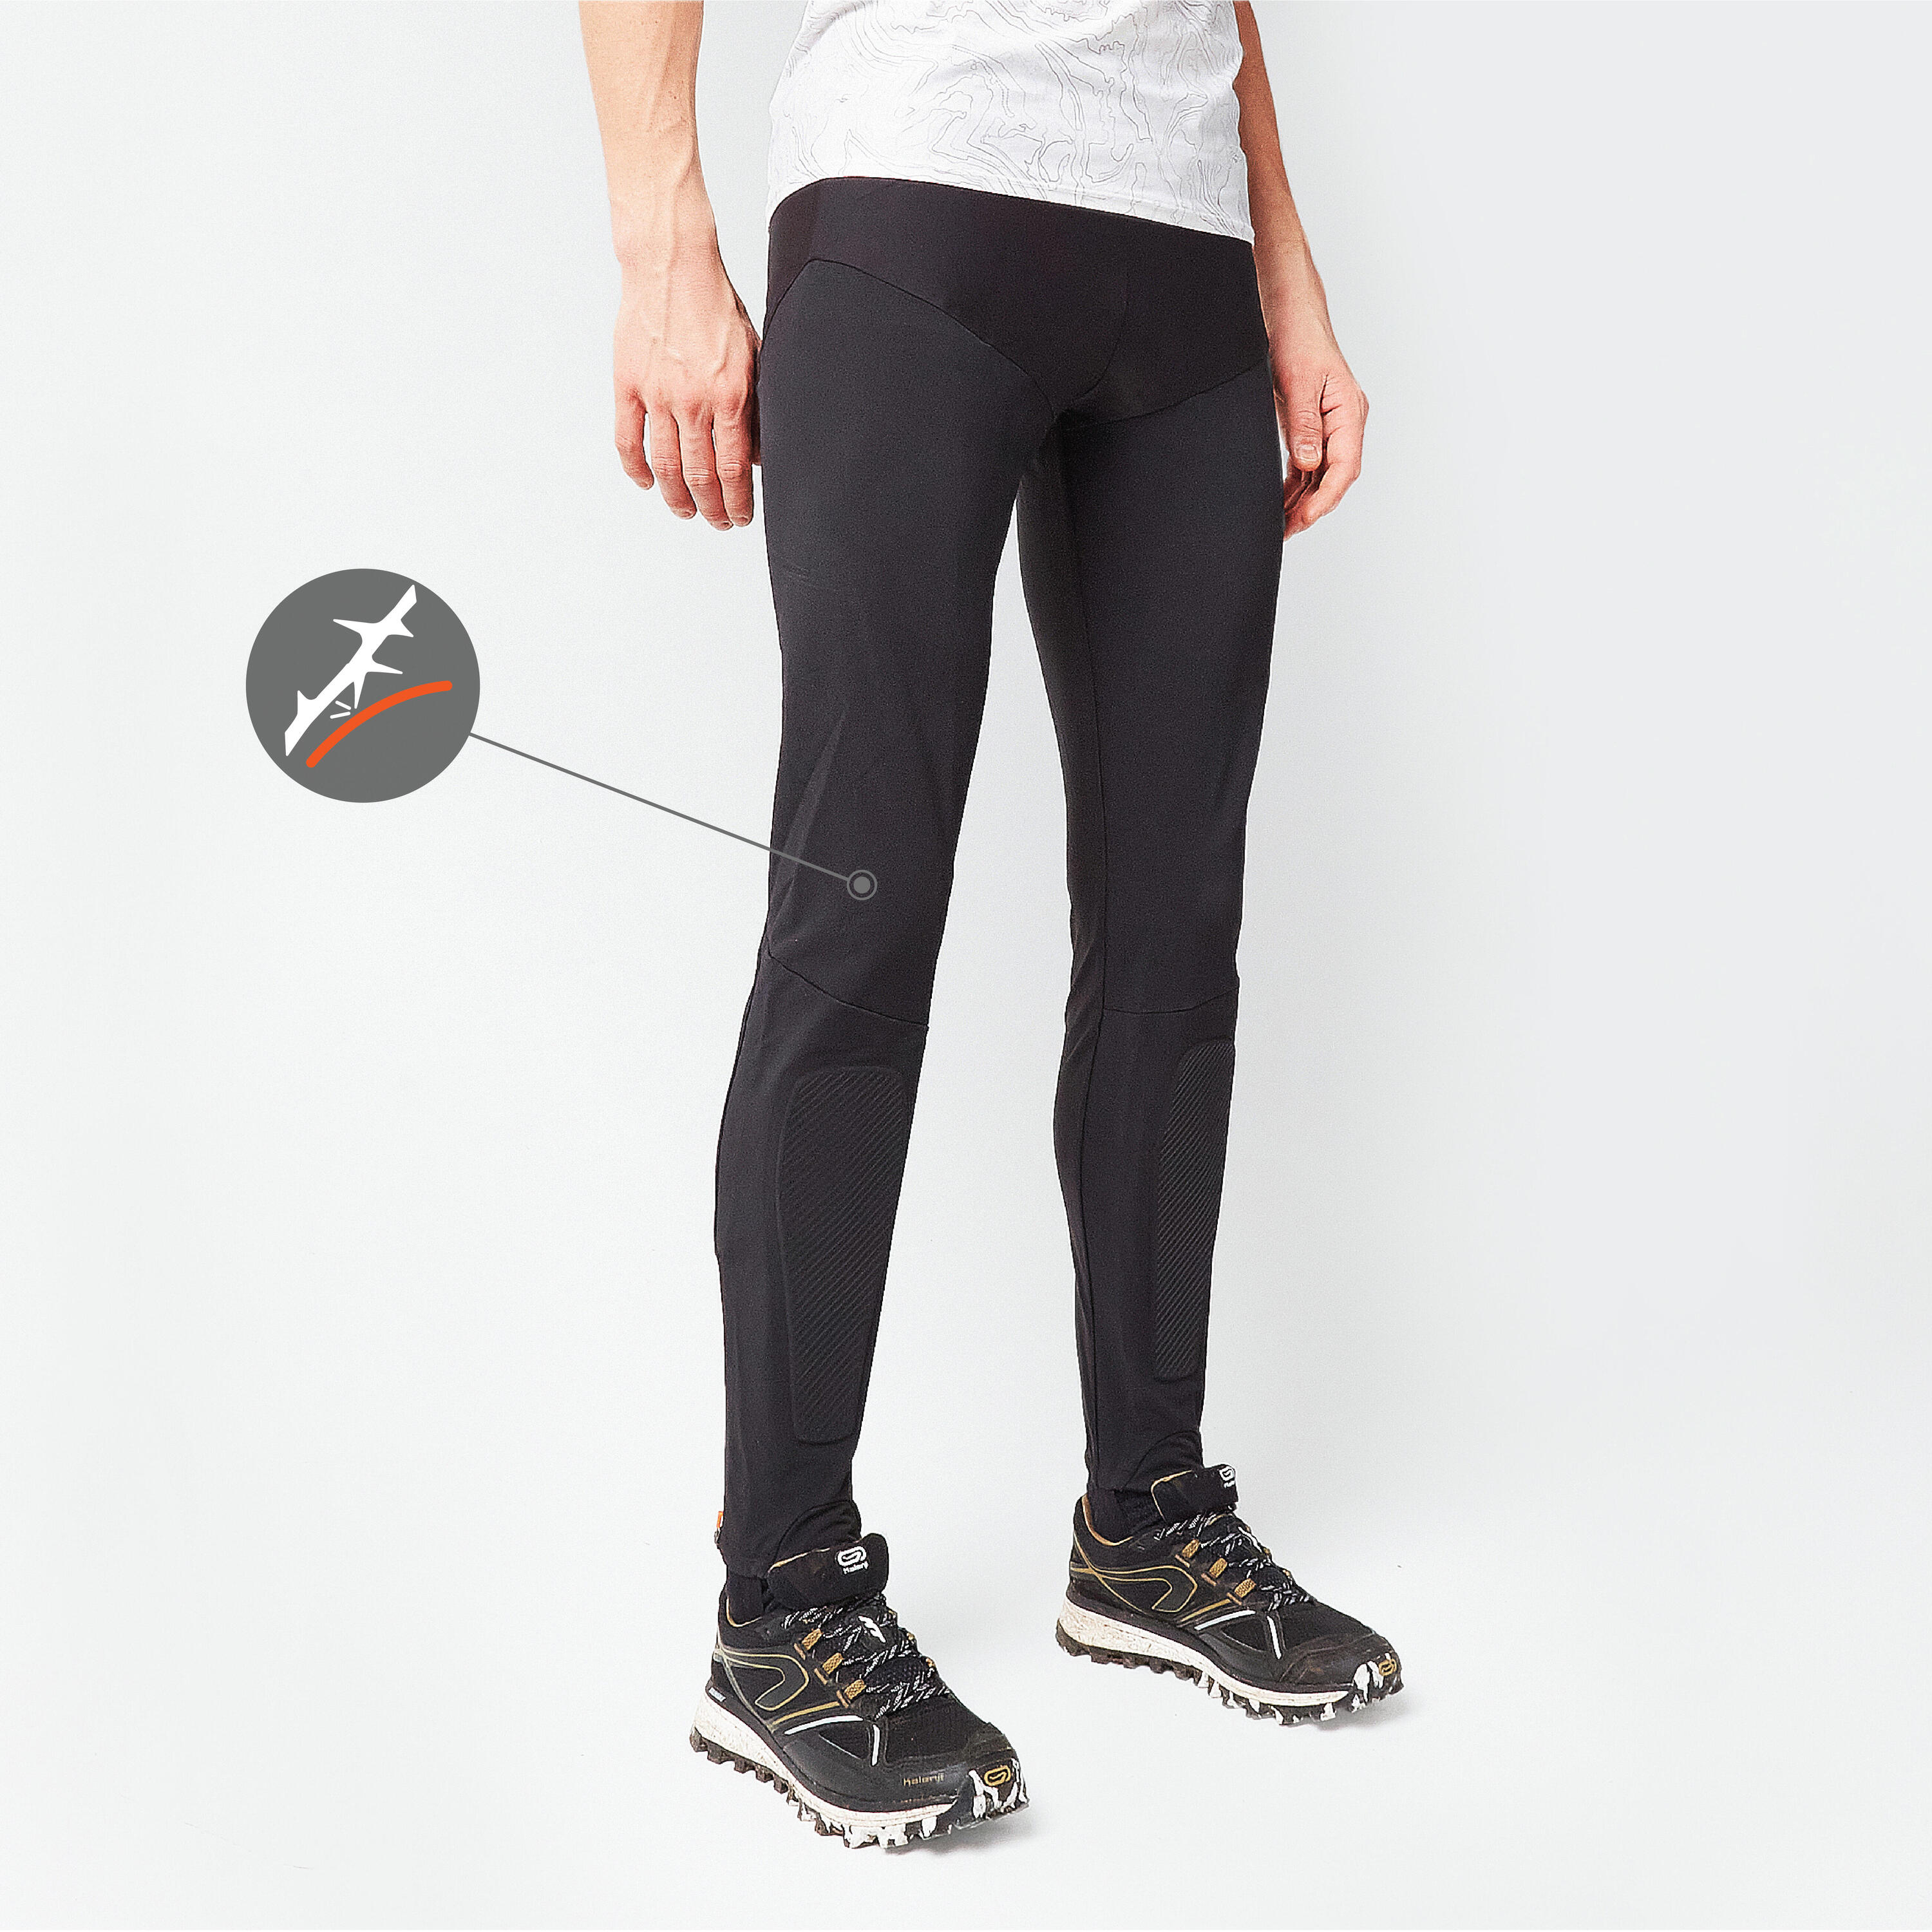 UNISEX PROTECTIVE AND RESISTANT 900 LONG RUNNING TIGHTS FOR ORIENTEERING  GEONAUTE